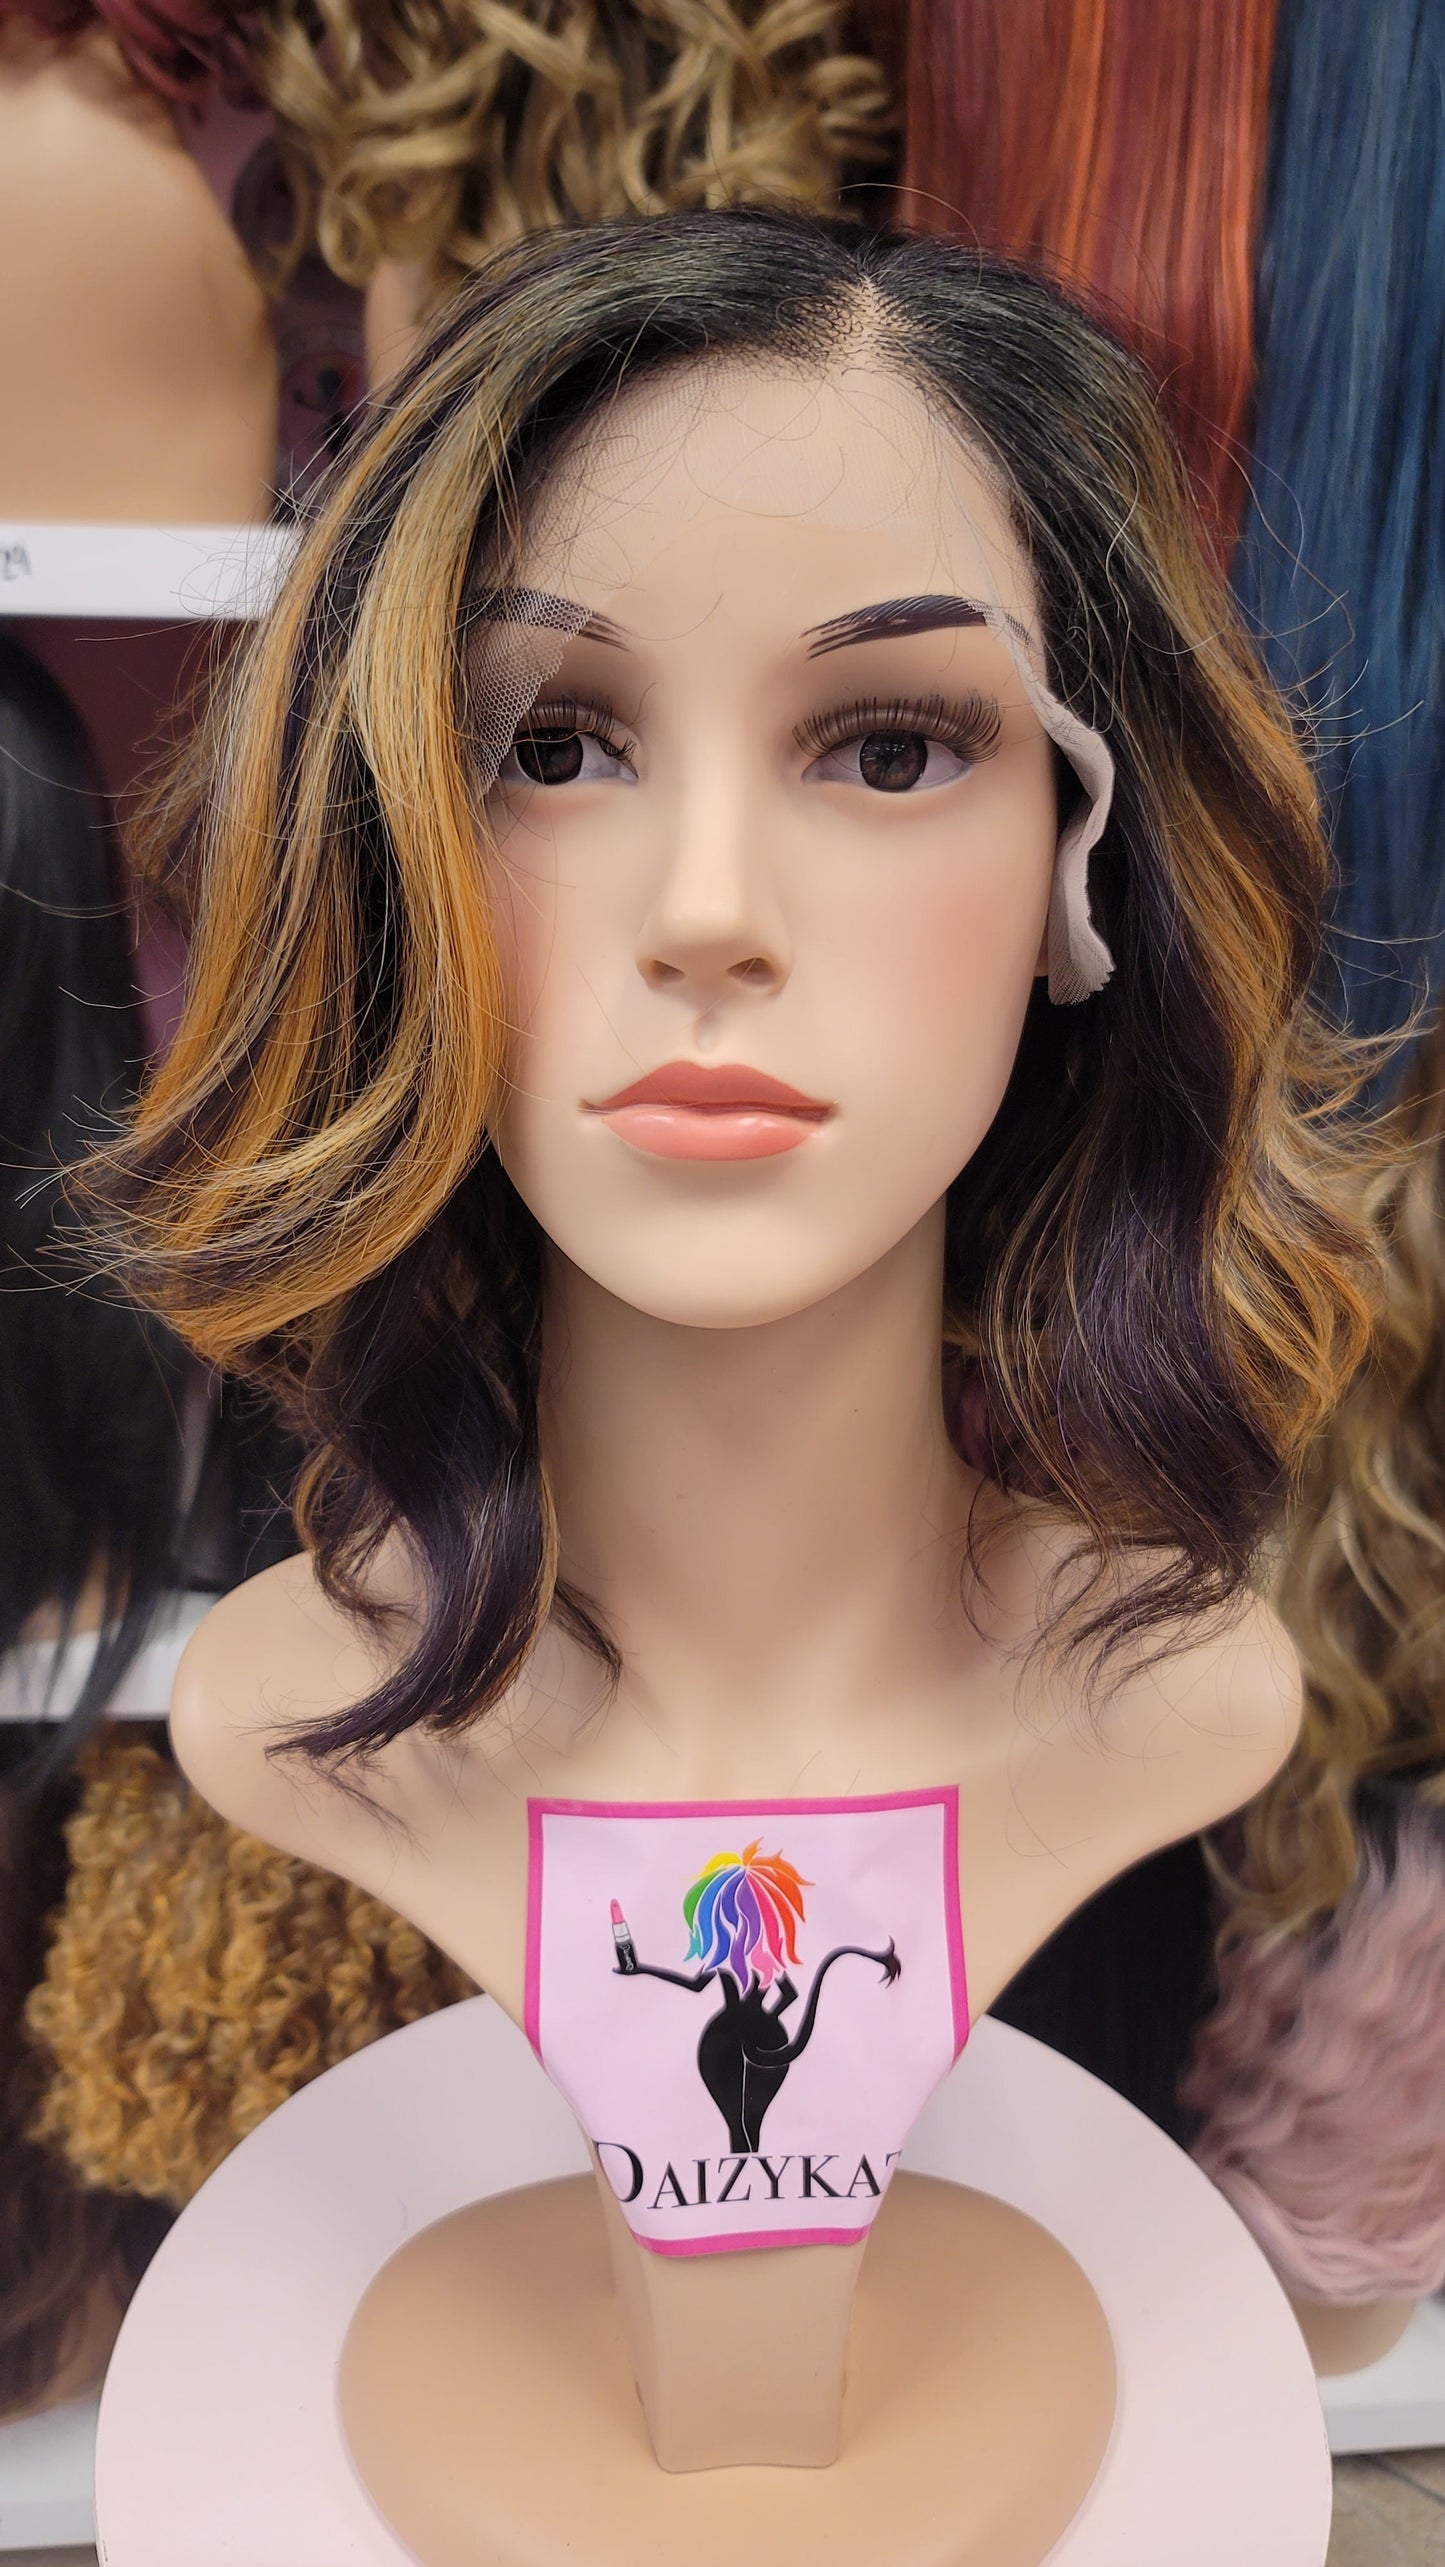 38 Maddy - 13x4 Free Part Lace Front Wig - 1B/PPGD - DaizyKat Cosmetics 38 Maddy - 13x4 Free Part Lace Front Wig - 1B/PPGD DaizyKat Cosmetics Wigs